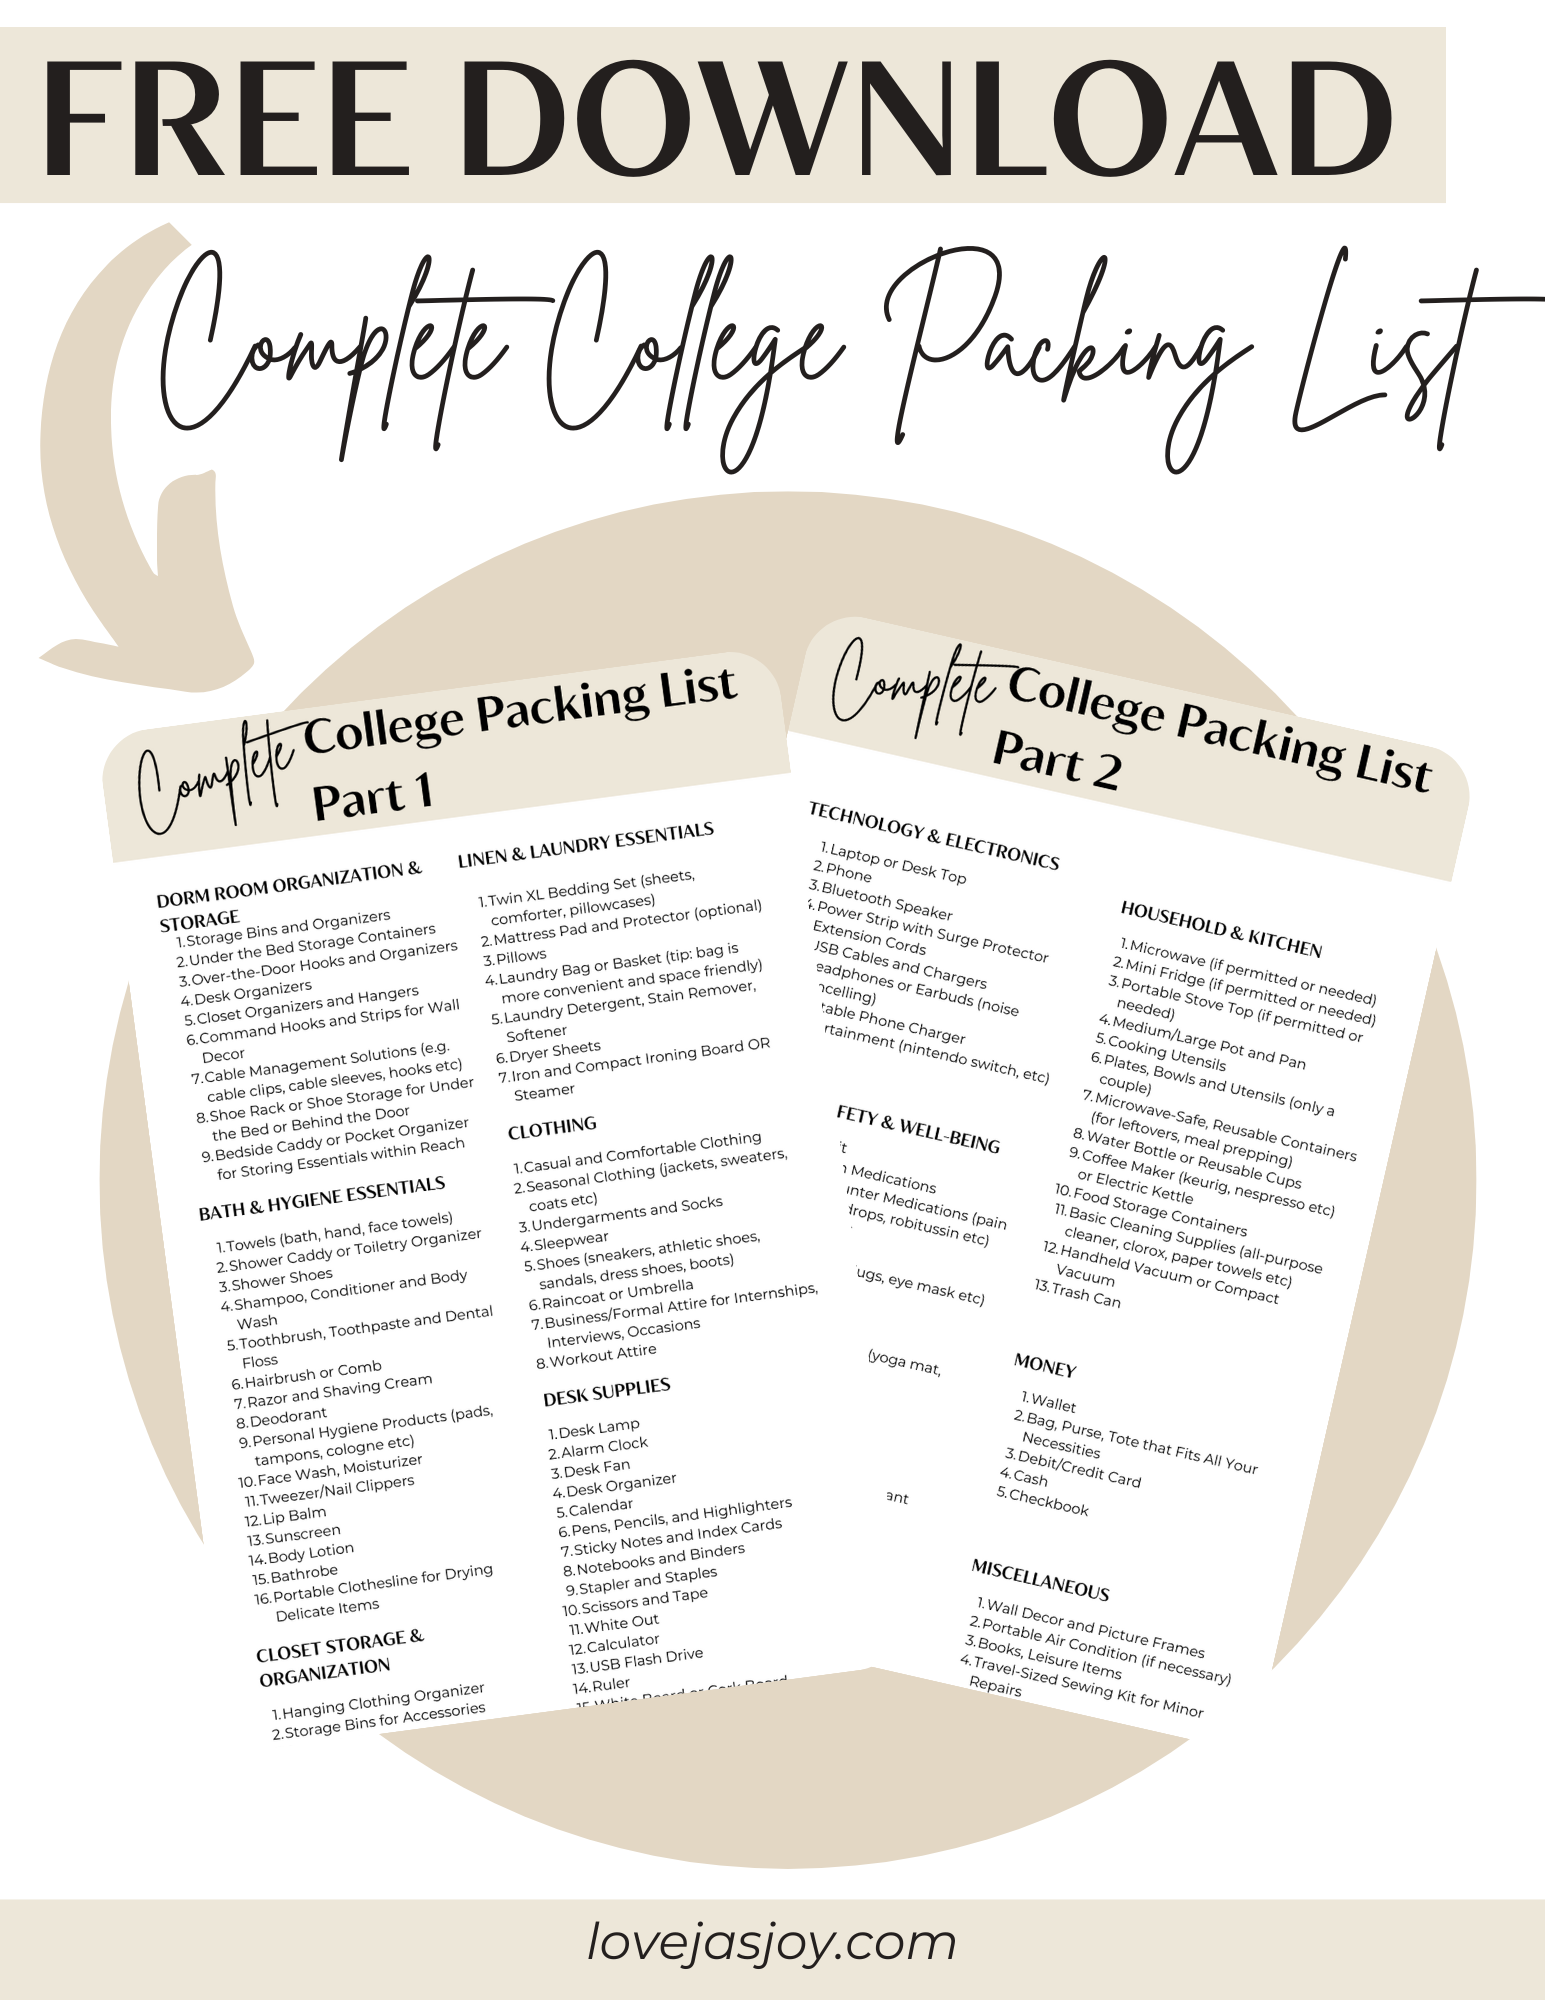 Free Download Complete College Packing List